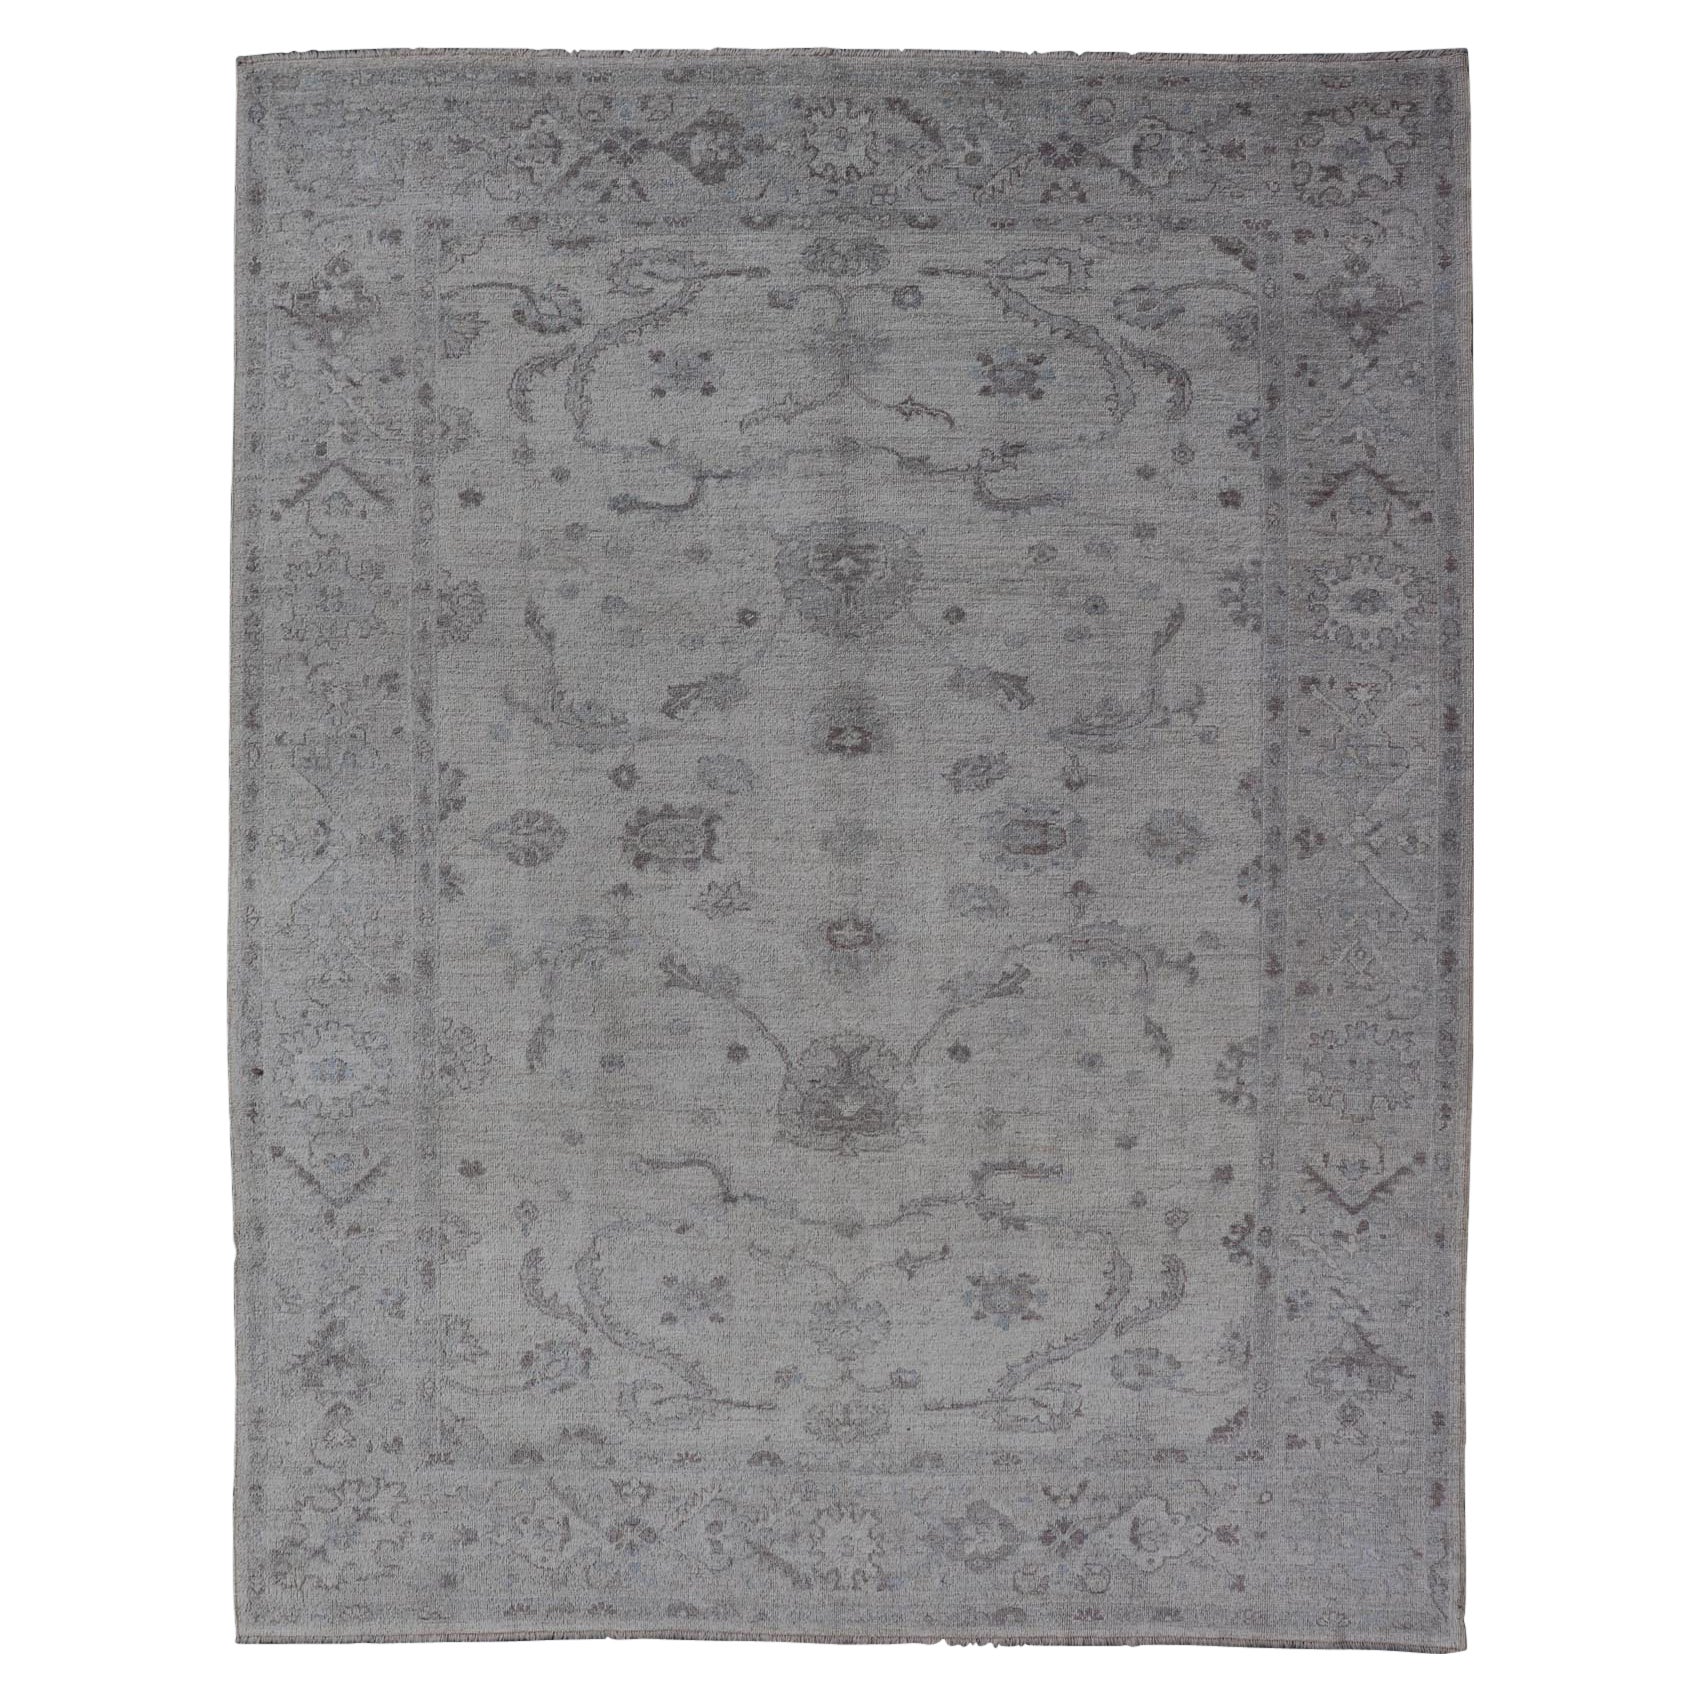 Angora Oushak Turkish Rug in Cream, Taupe, Silver, Light Brown Light Blue Colors